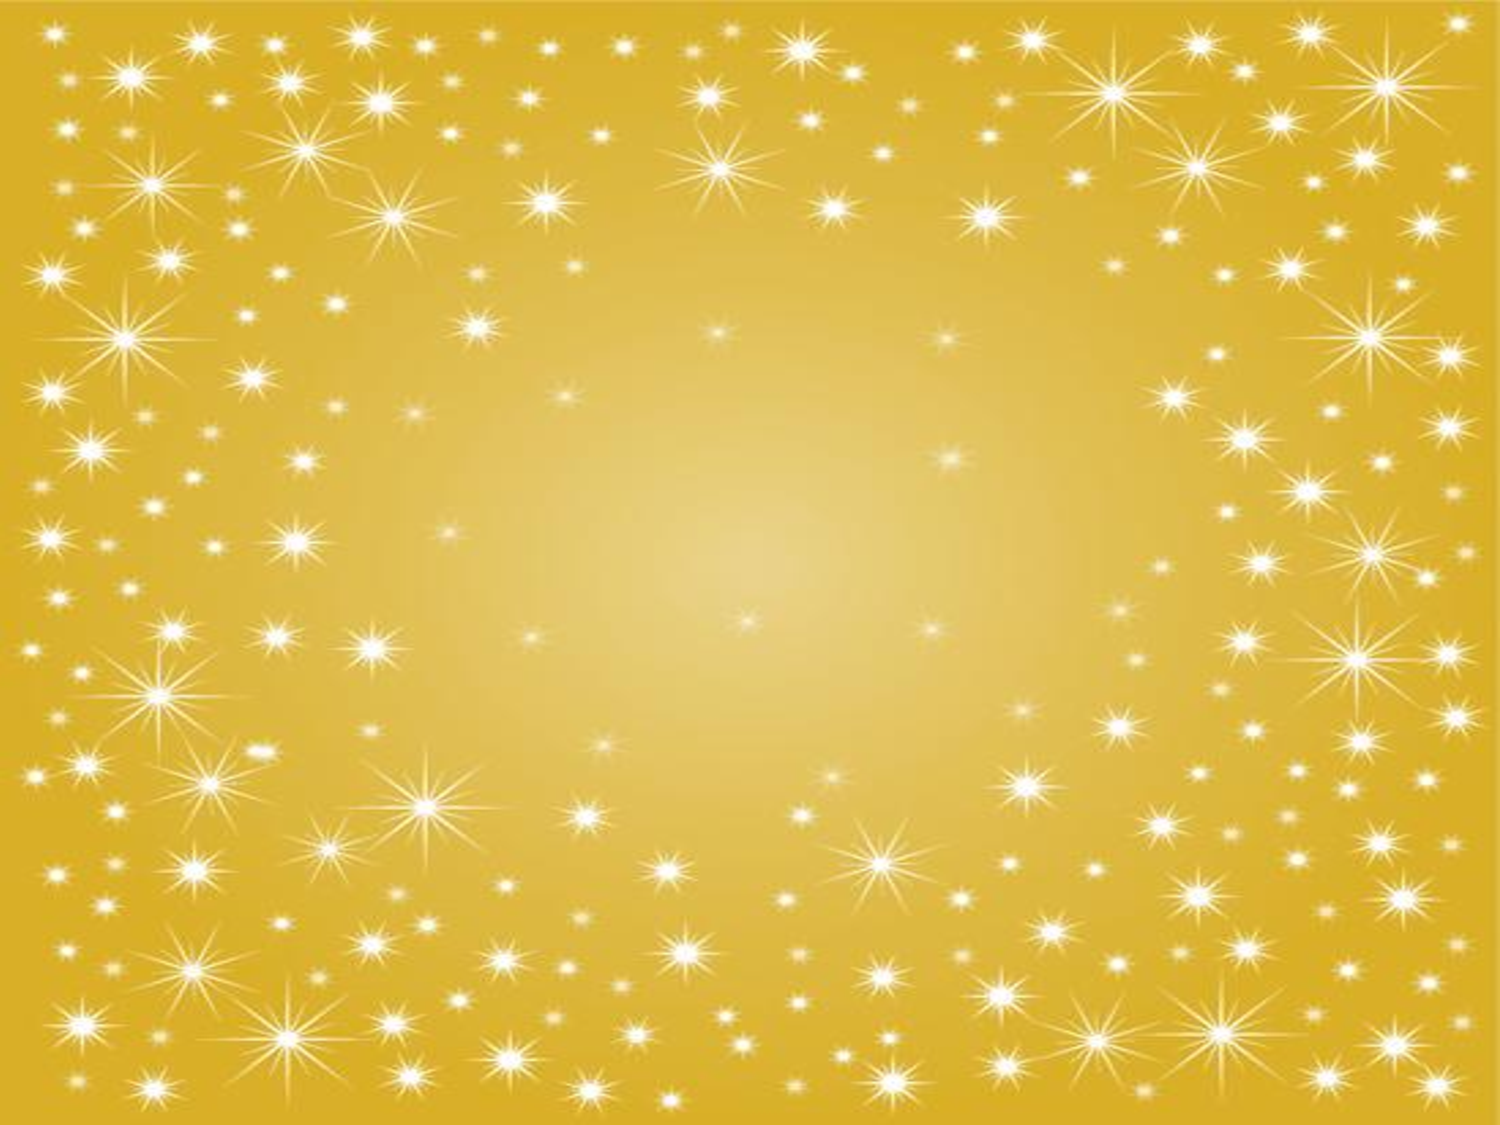 Free download 500 PPT background gold Full HD, high quality